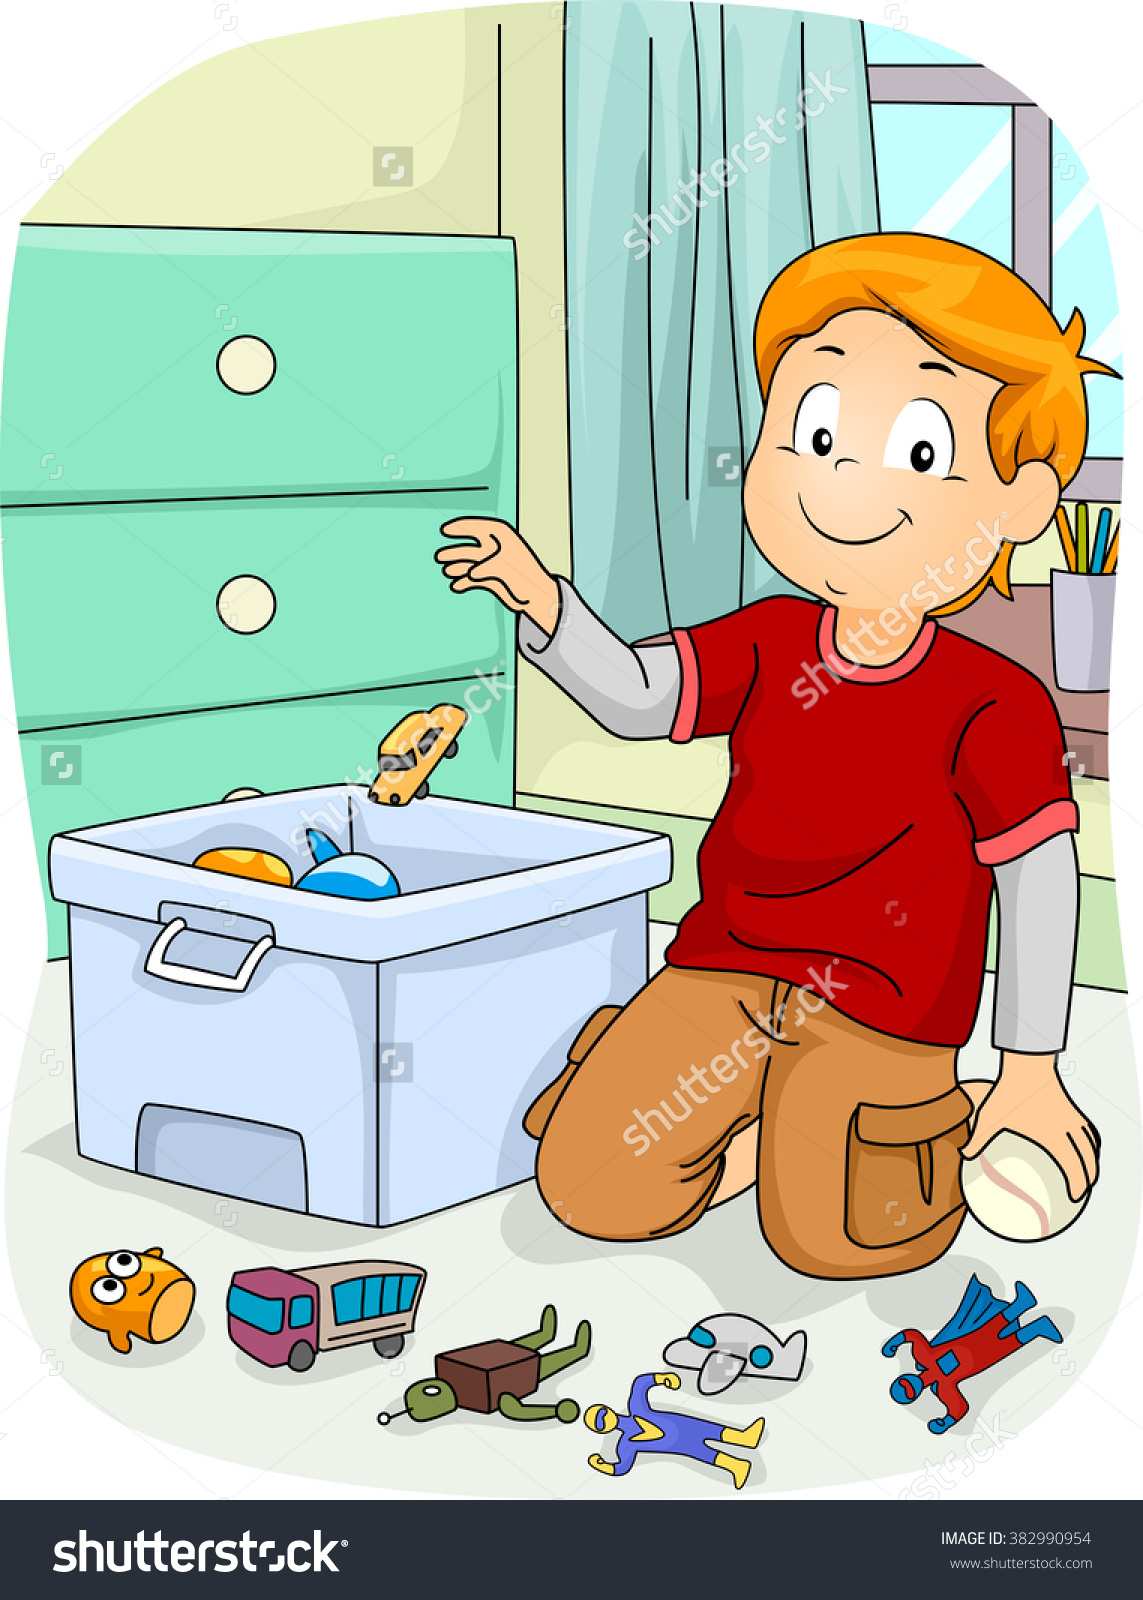 clipart picking up toys - photo #17